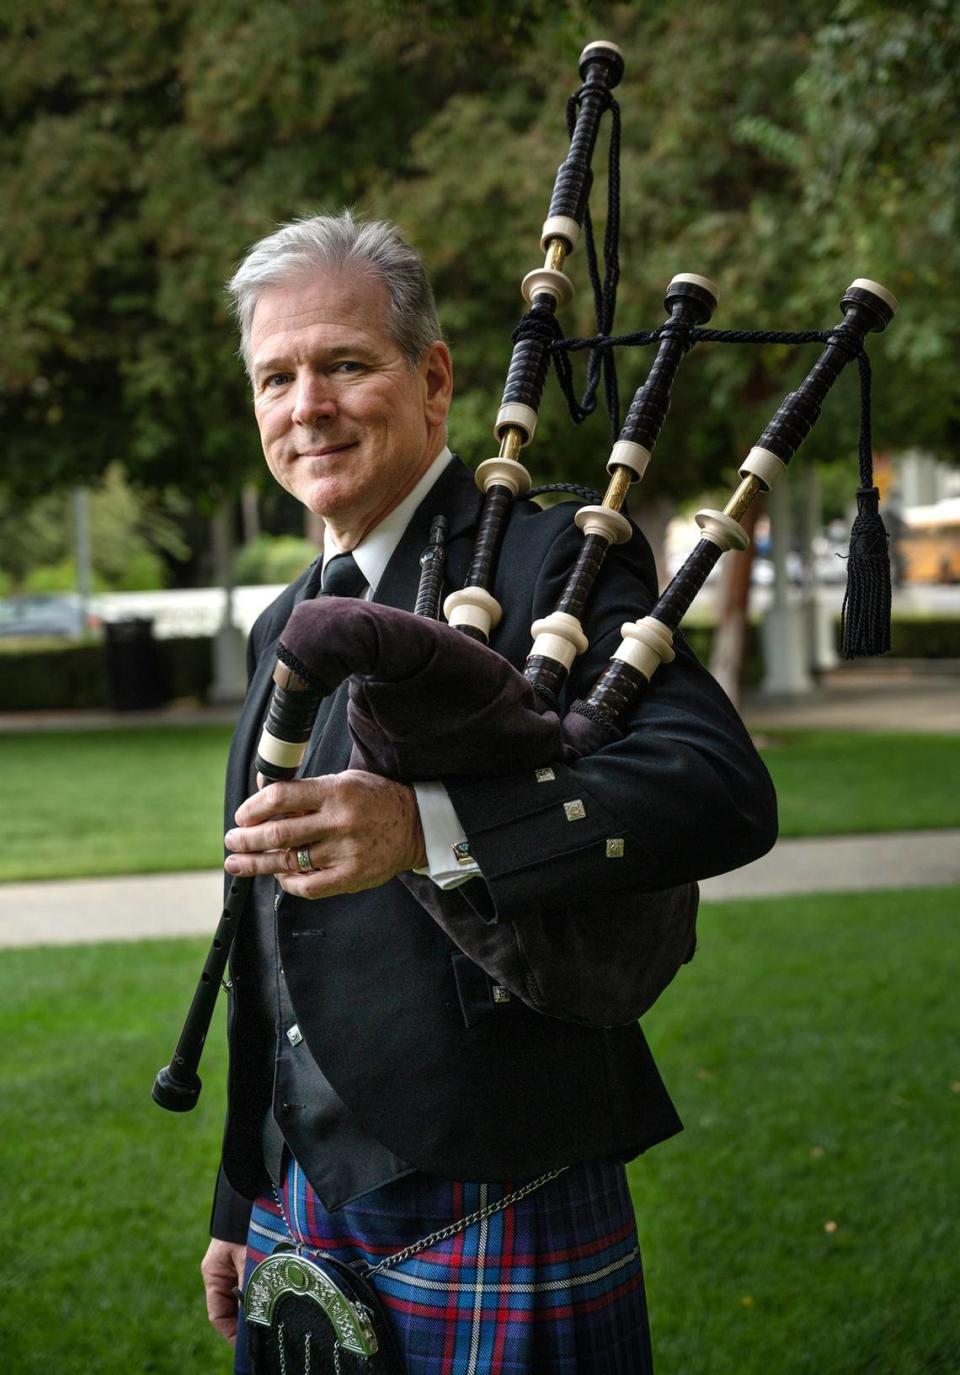 Bagpiper and author Michael Akard has published a history of the bagpipes. Photographed in Modesto, Calif., on Thursday, Oct. 7, 2021.